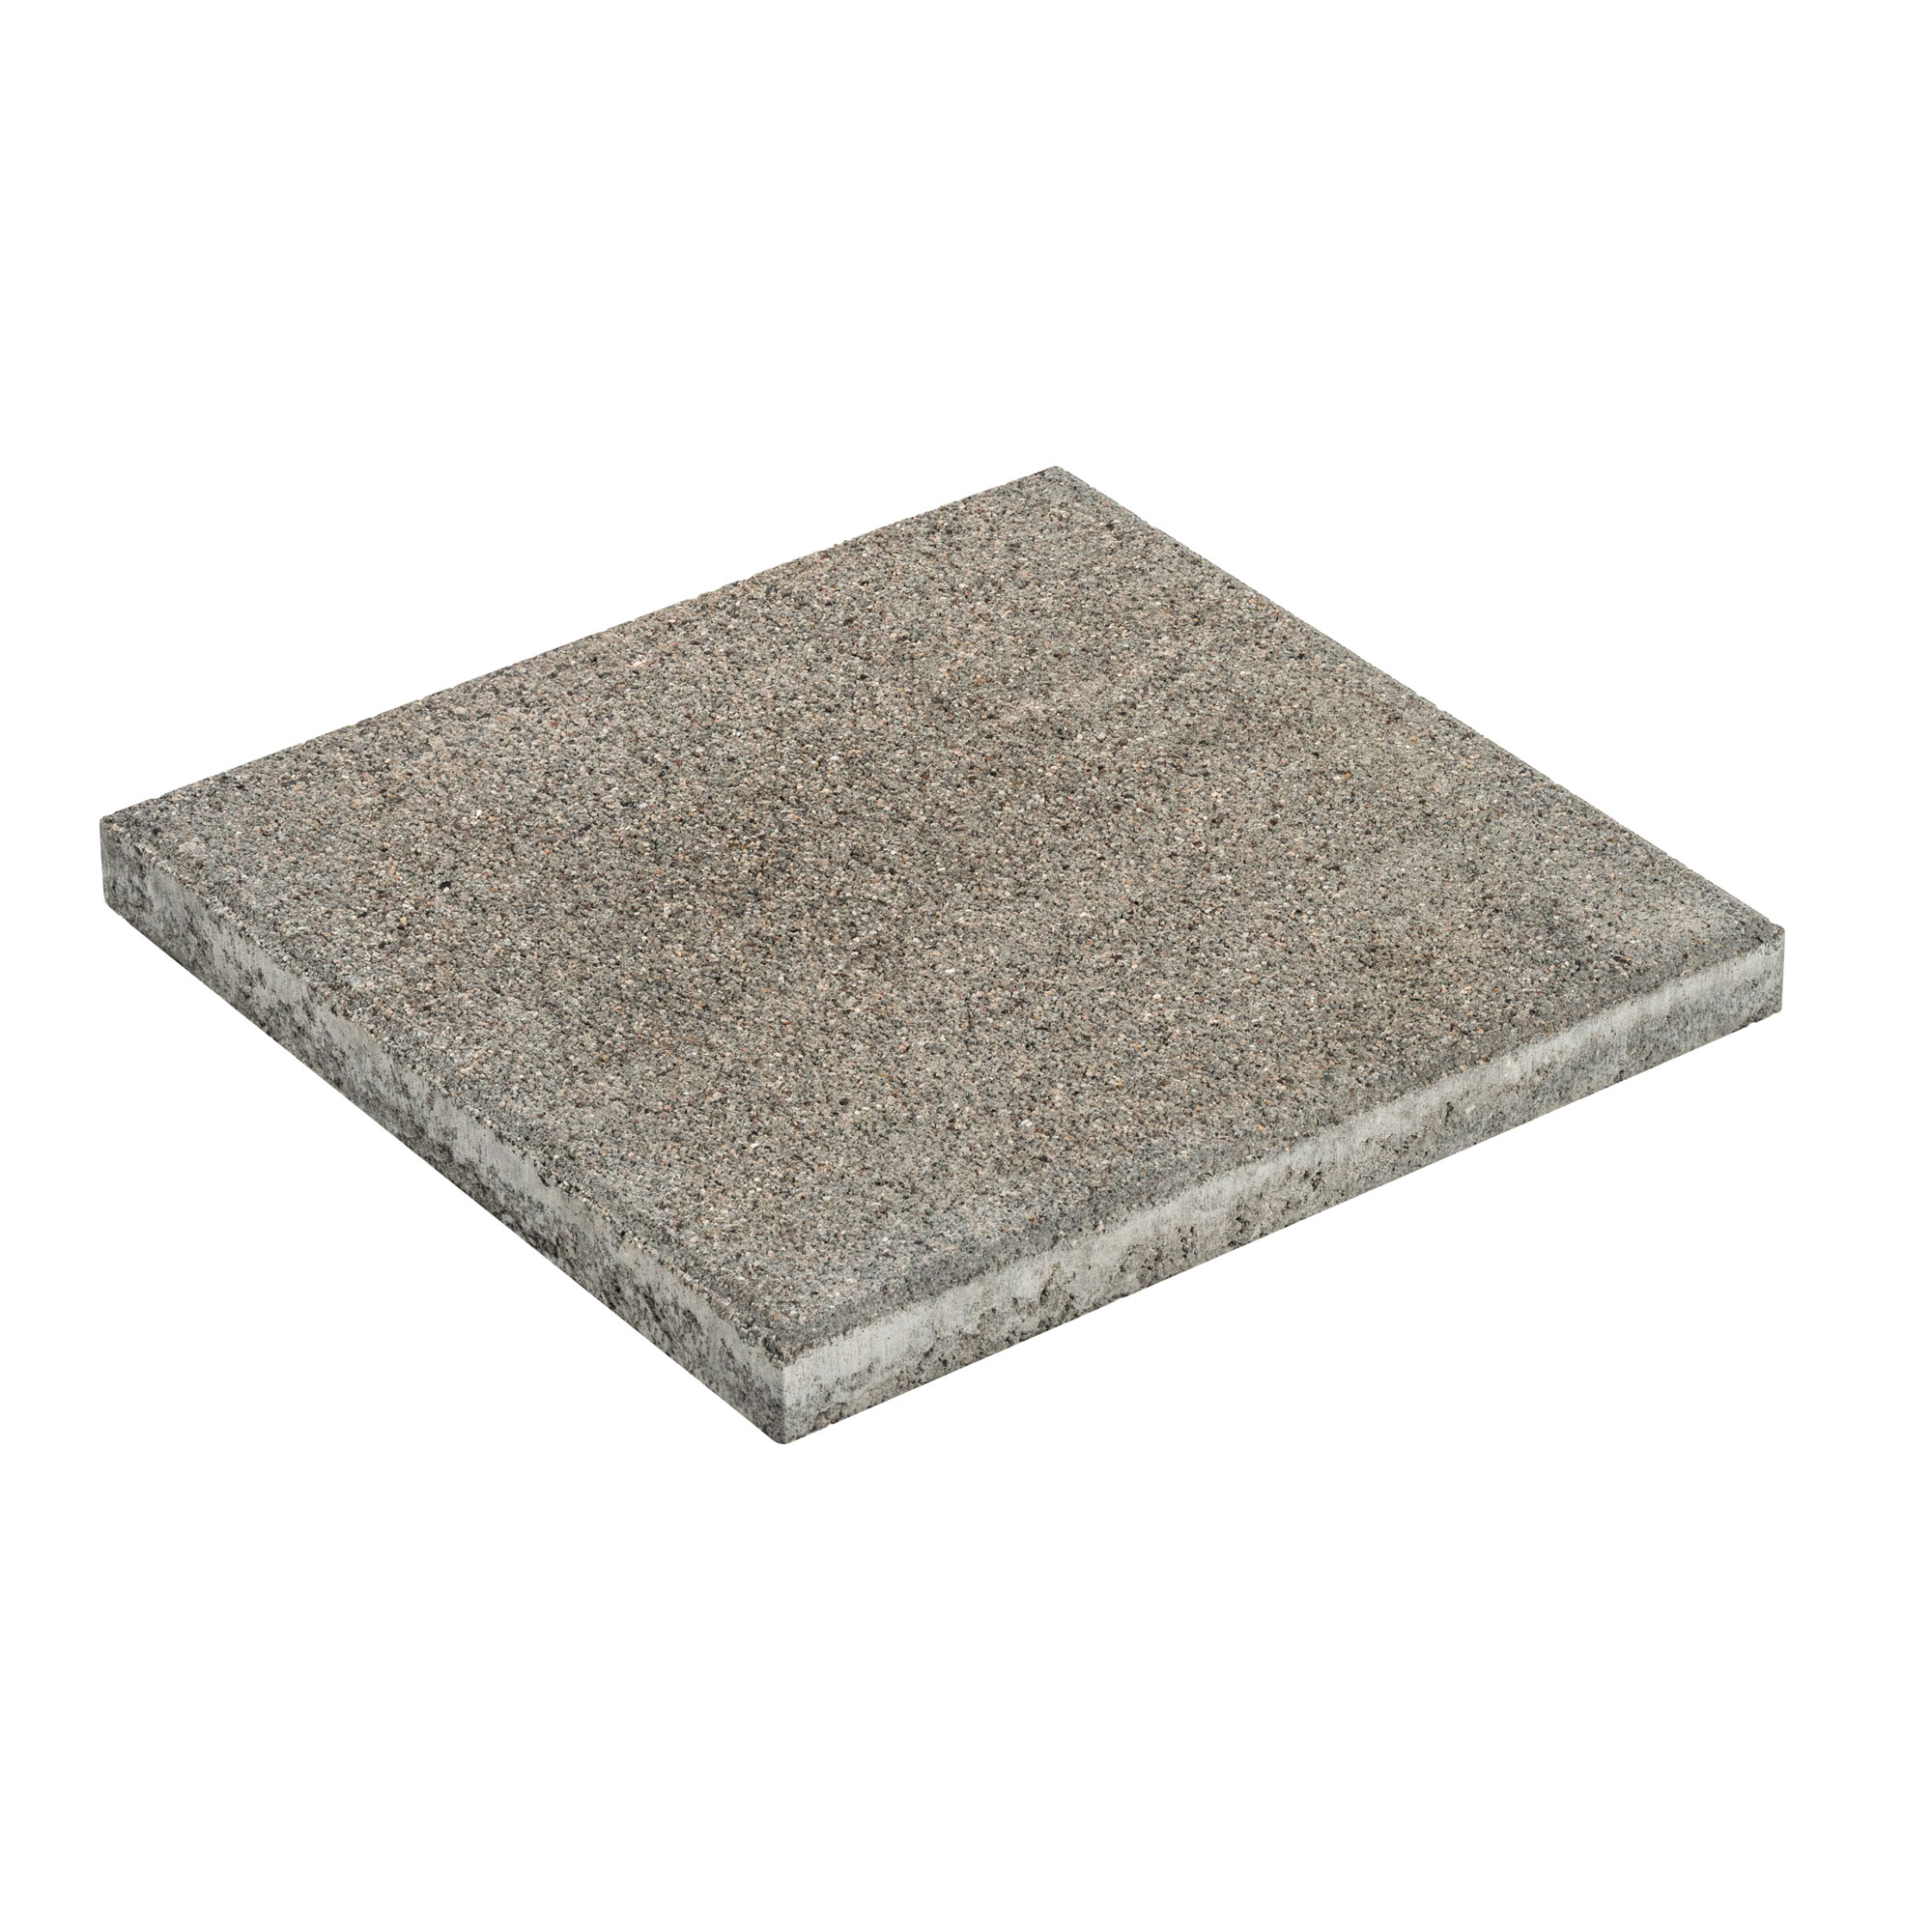 T-Court 'Washed' Beton grau 40 x 40 x 4 cm + product picture